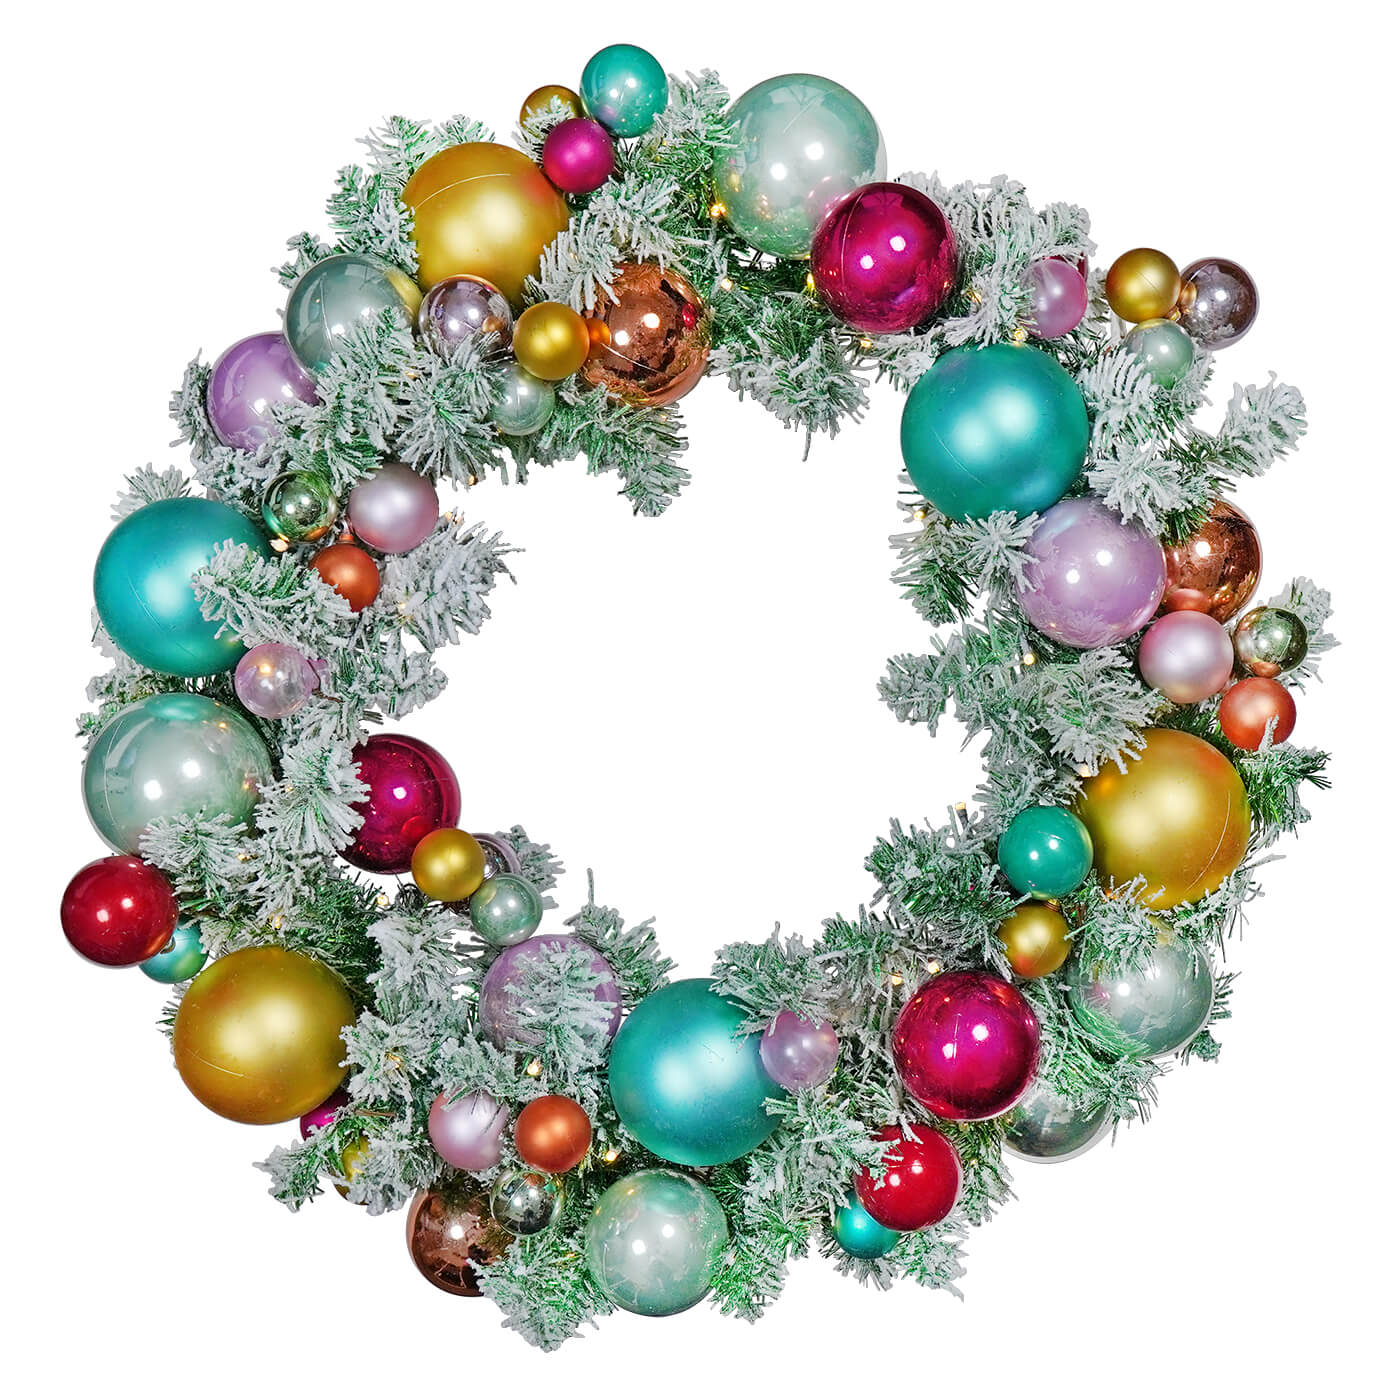 Large Lighted Flocked & Ornamented Green Wreath